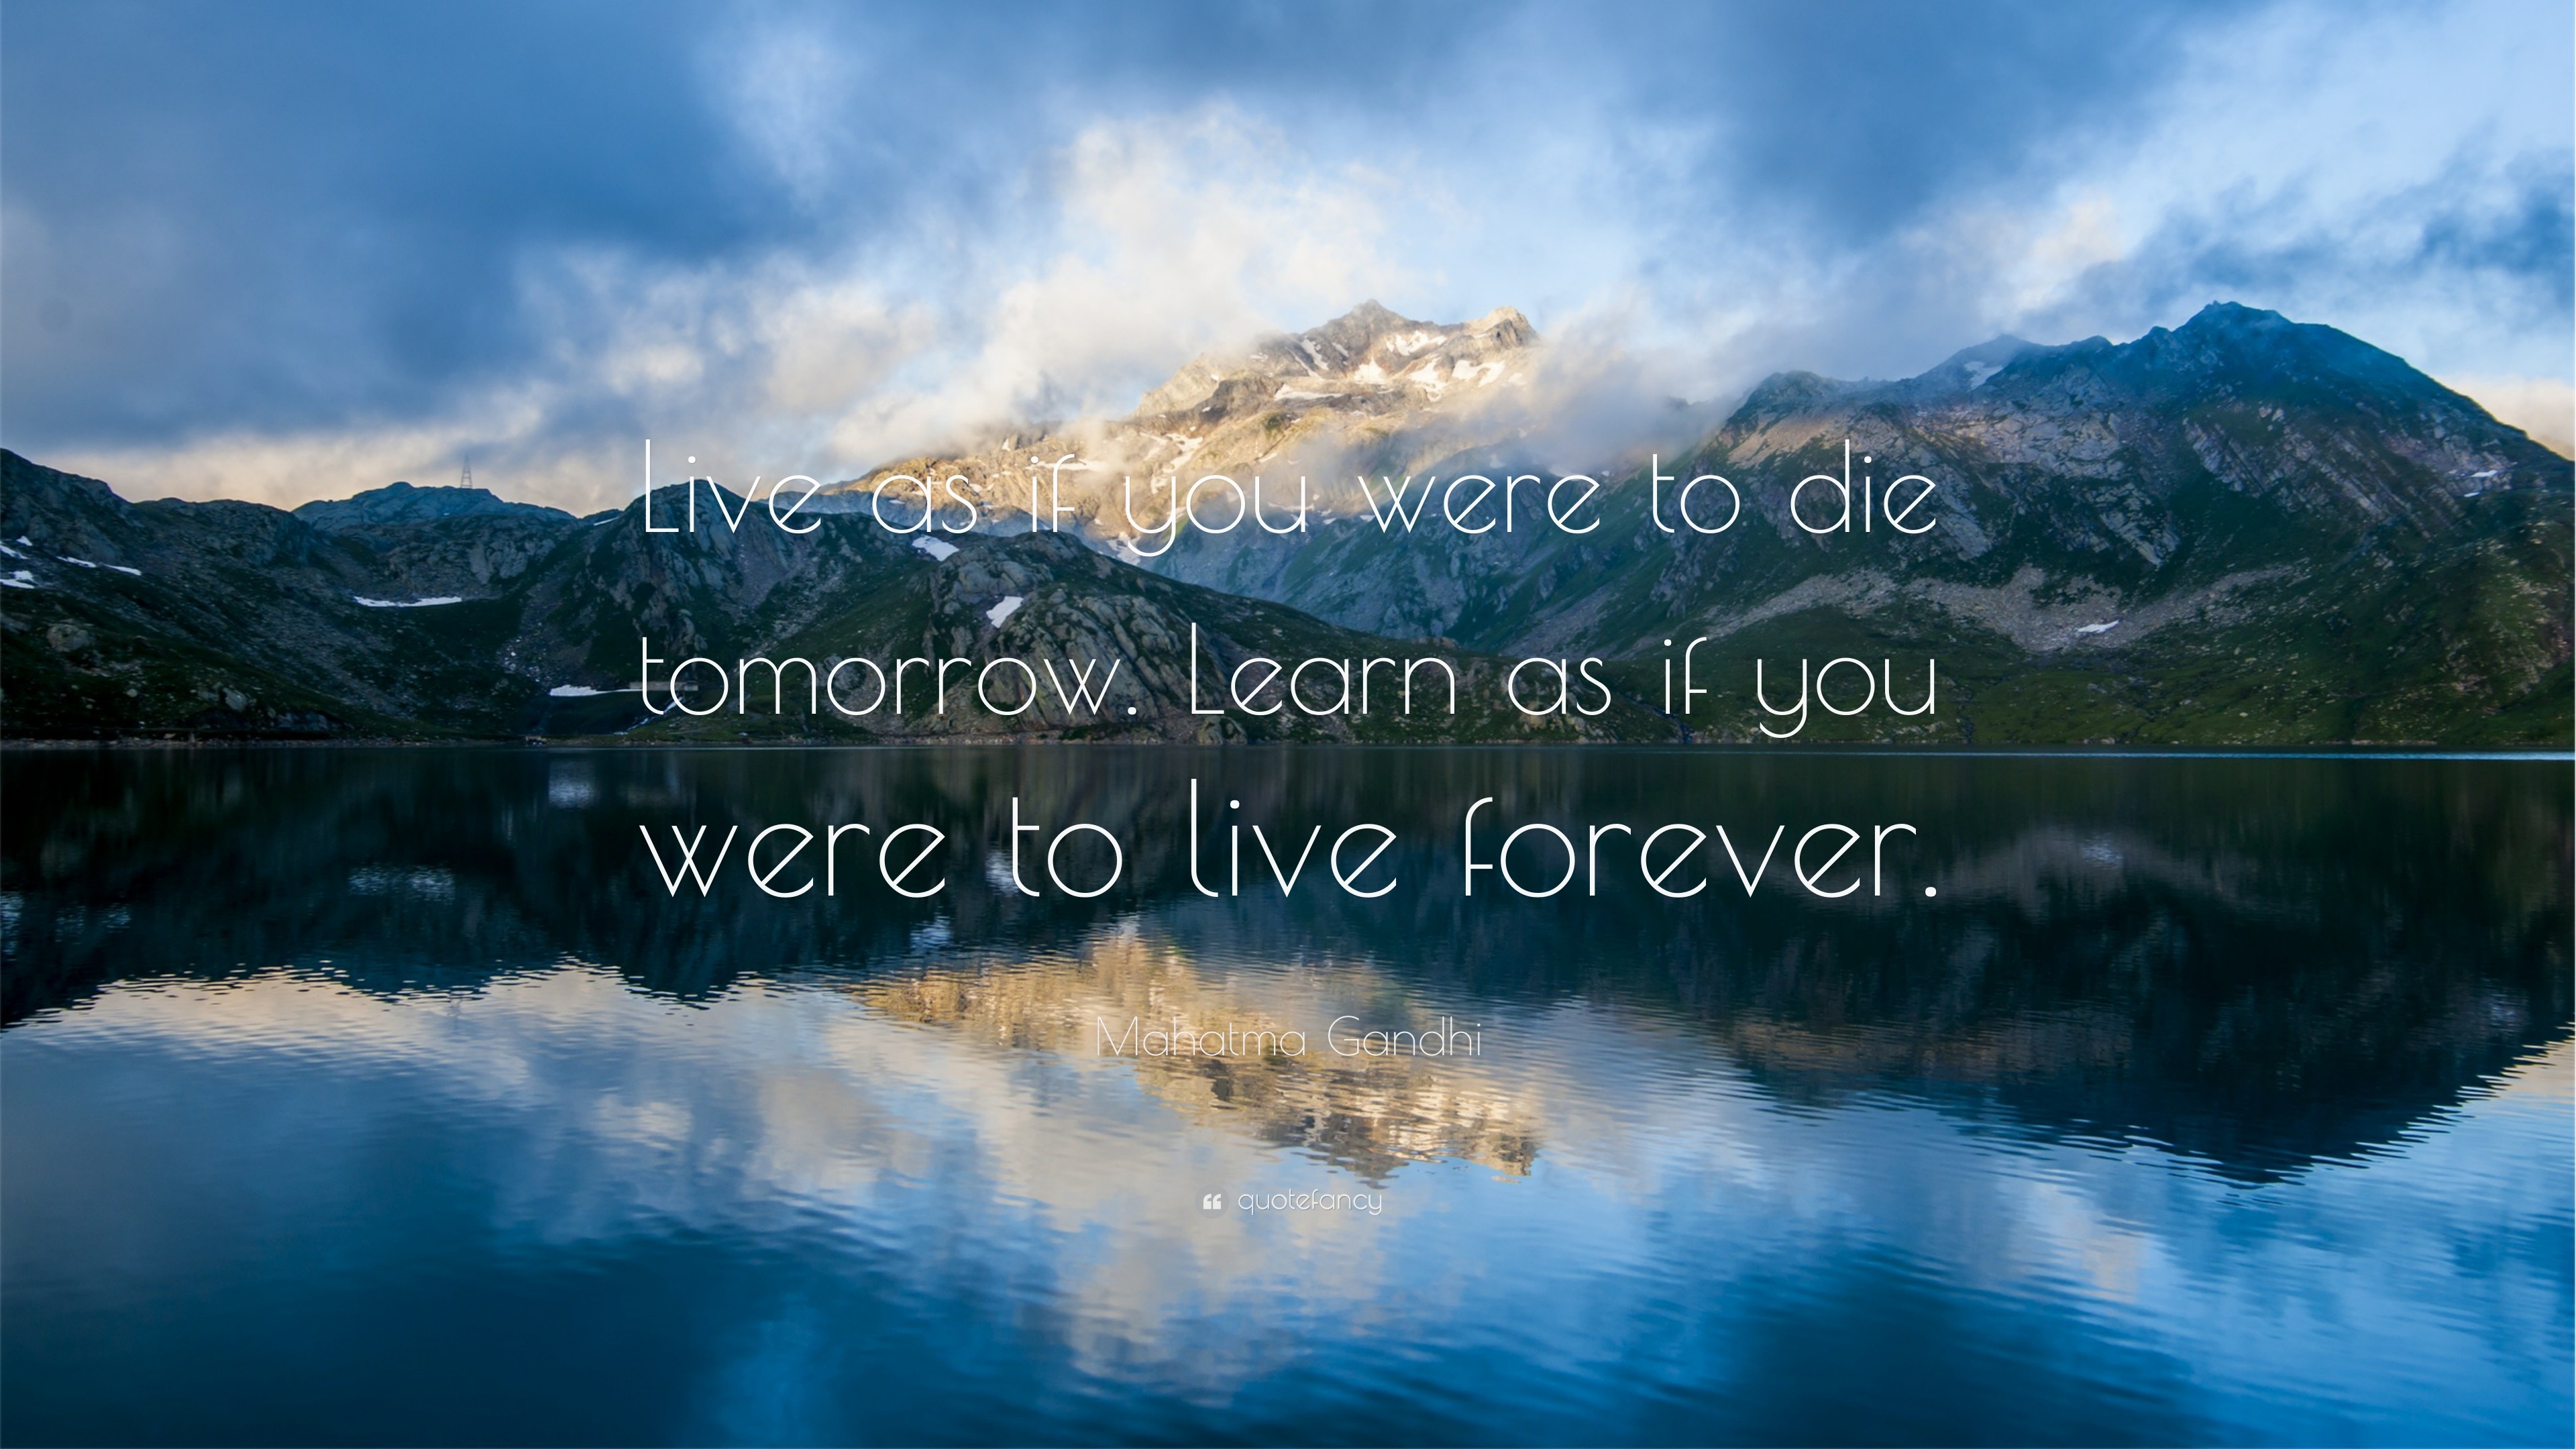 Mahatma Gandhi Quote Live As If You Were To Die Tomorrow Learn As If You Were